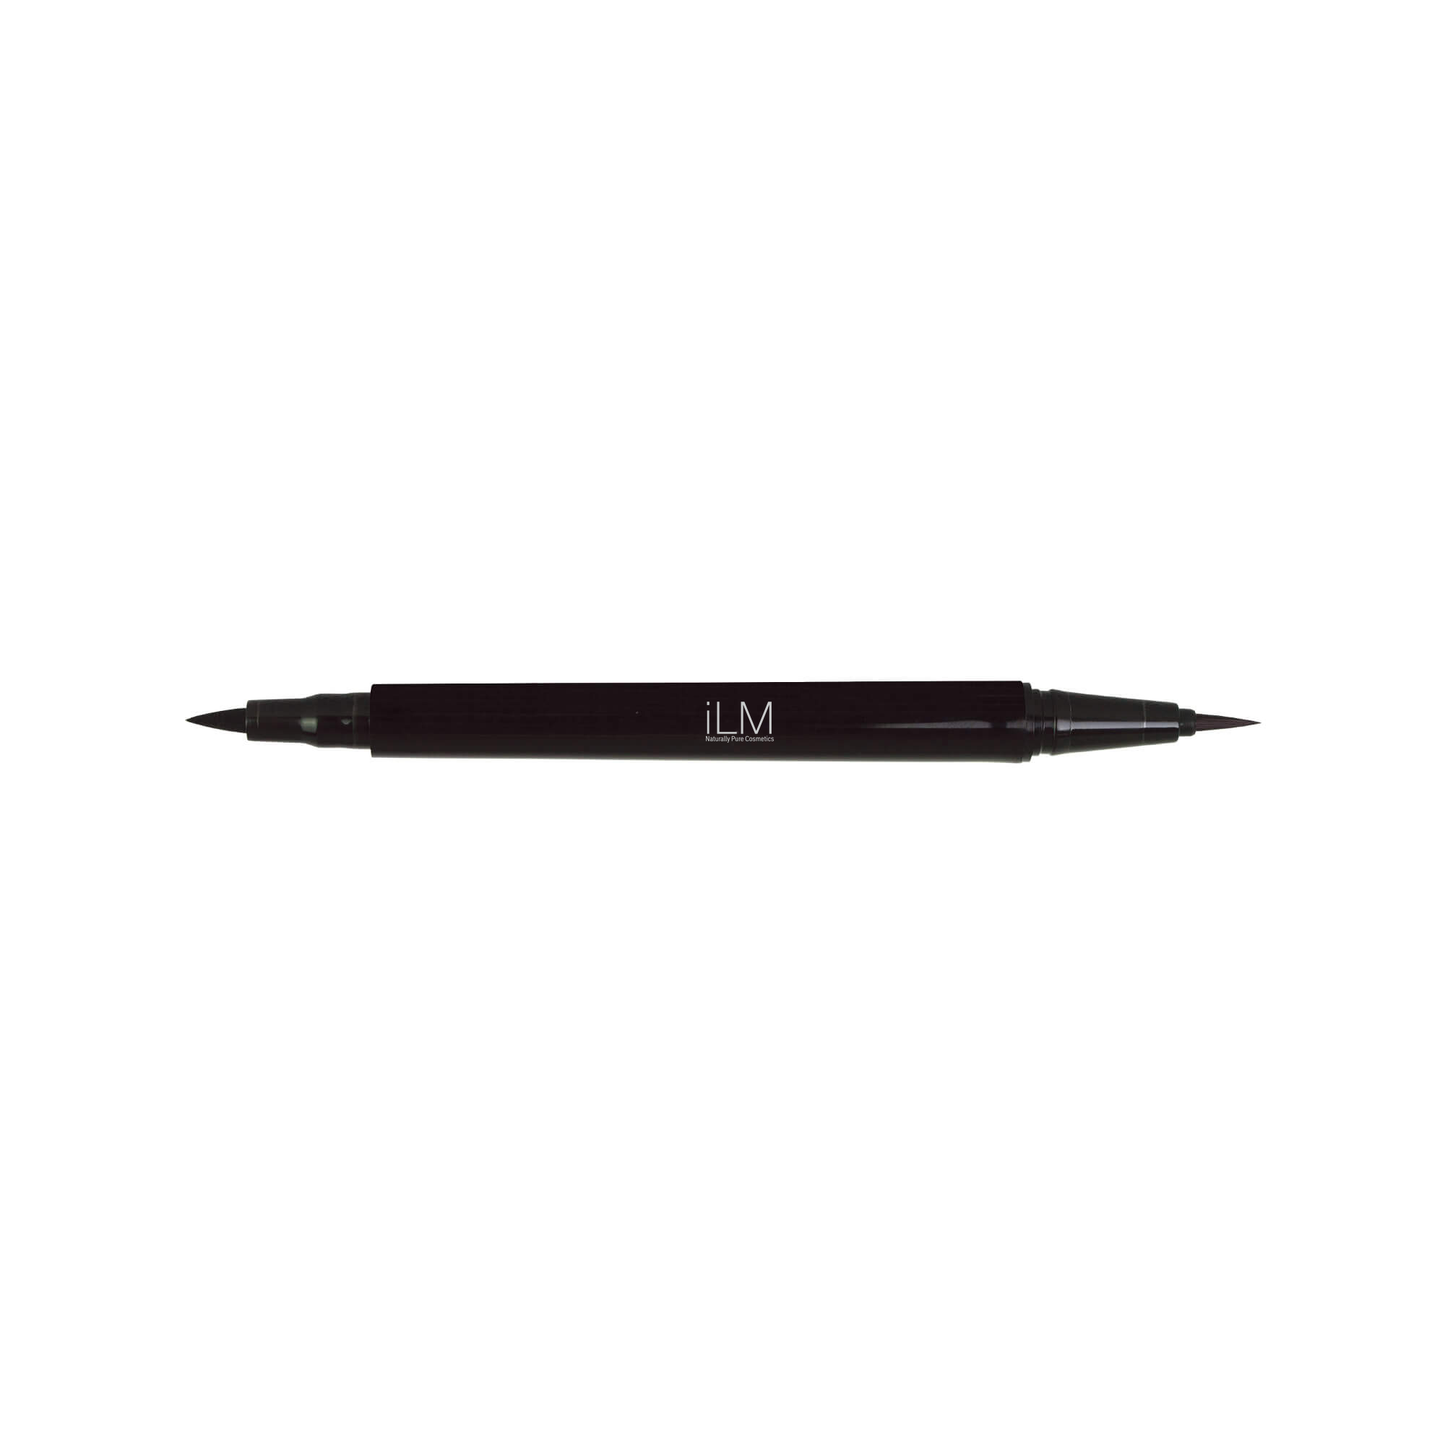 The iLM Cosmetic Dual Tip Eye Definer Pen provides precision and versatility for creating various looks with its two controlled brushes. The fine brush end offers sharp lines, perfect for a classic cat eye, while the larger, felt tip end allows for more dramatic looks with just one sweep. The long-lasting formula prevents smudging and flaking, making it the ultimate choice for enhancing your eye shape.